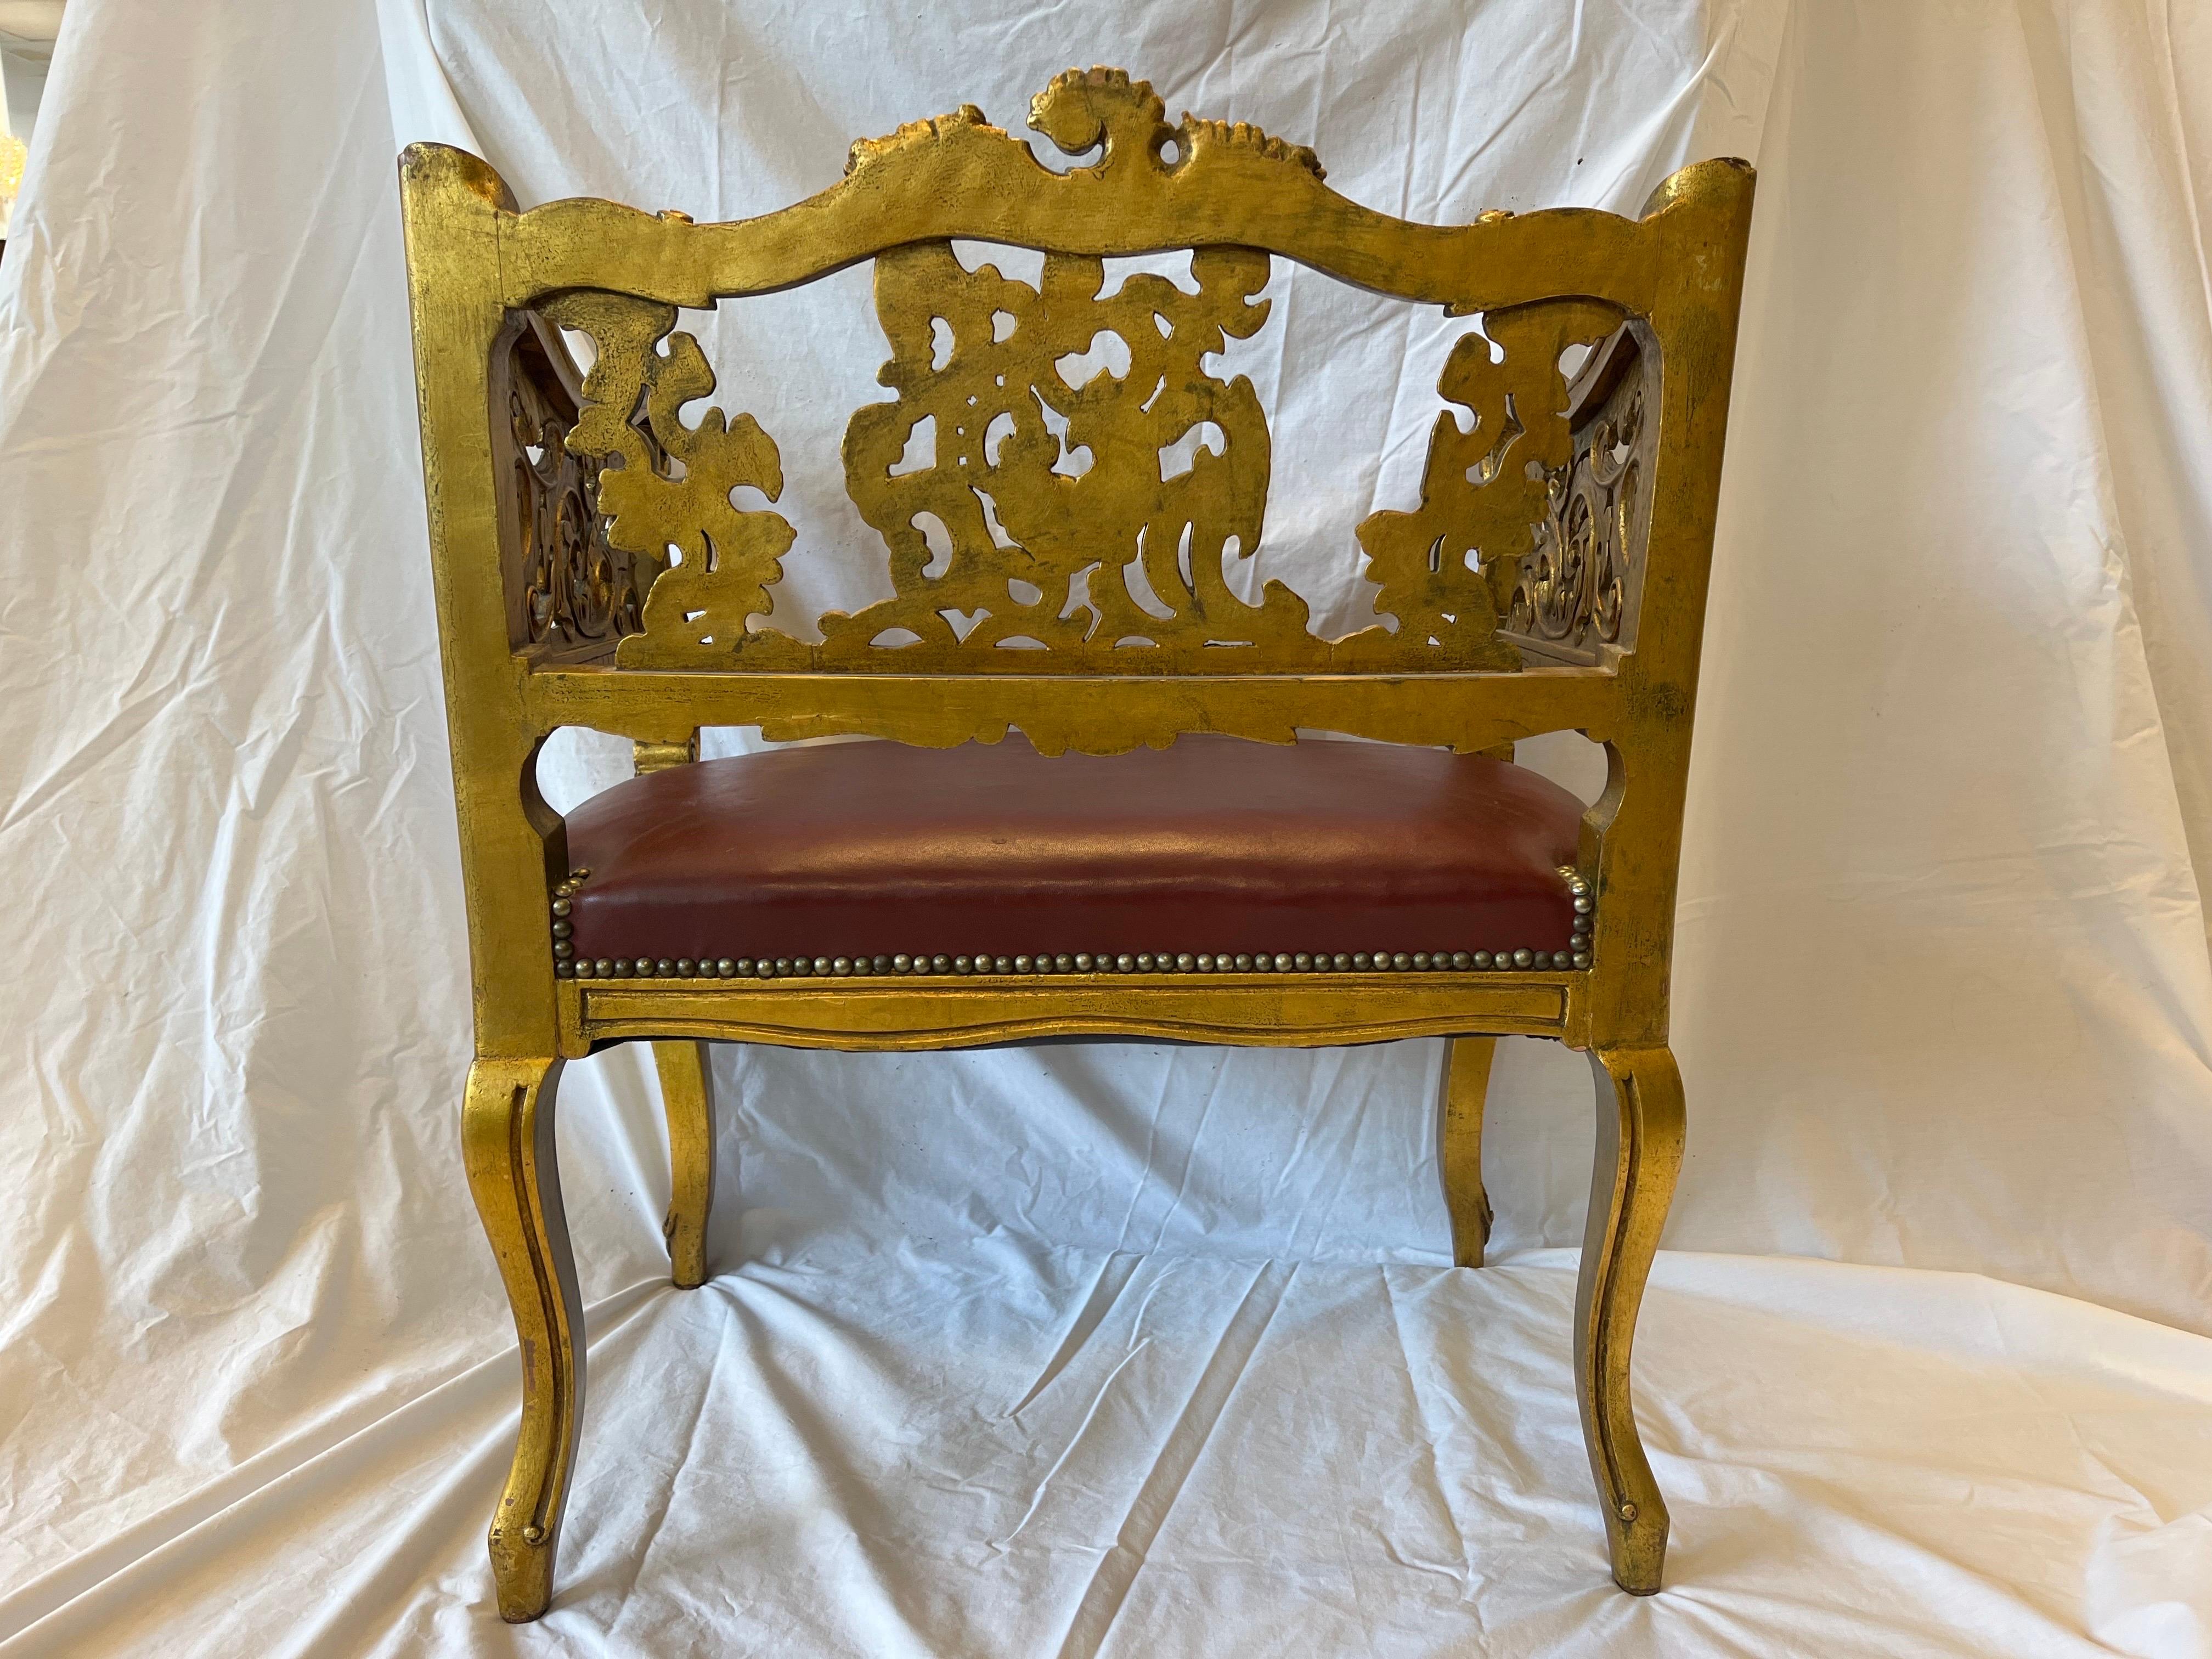 Antique Carved and Gilt Wood Arm Chair Bench Ornate Design Red Upholstered Seat For Sale 10